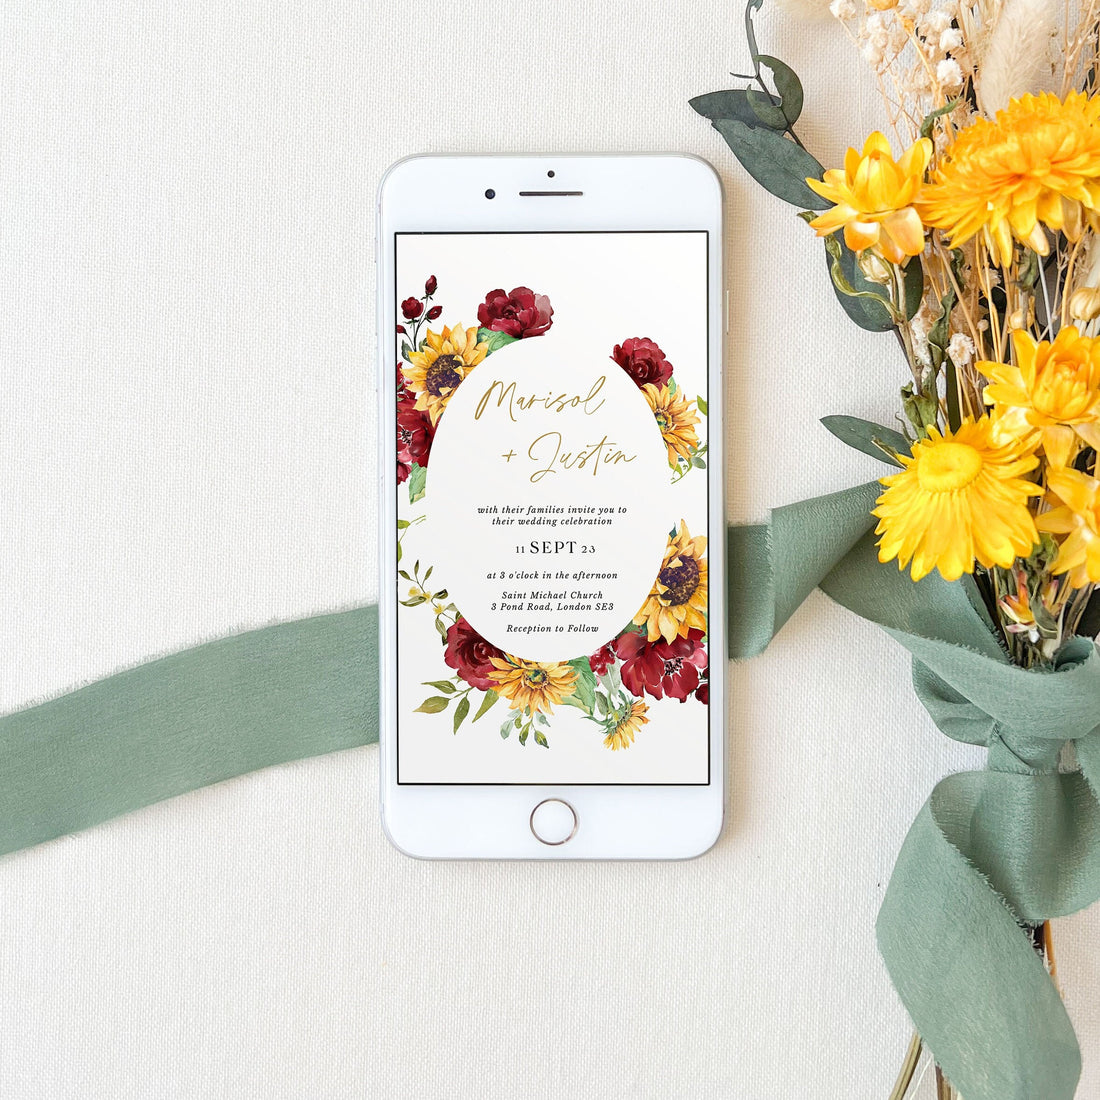 RUBY Digital Wedding Invitations Red Roses and Sunflowers